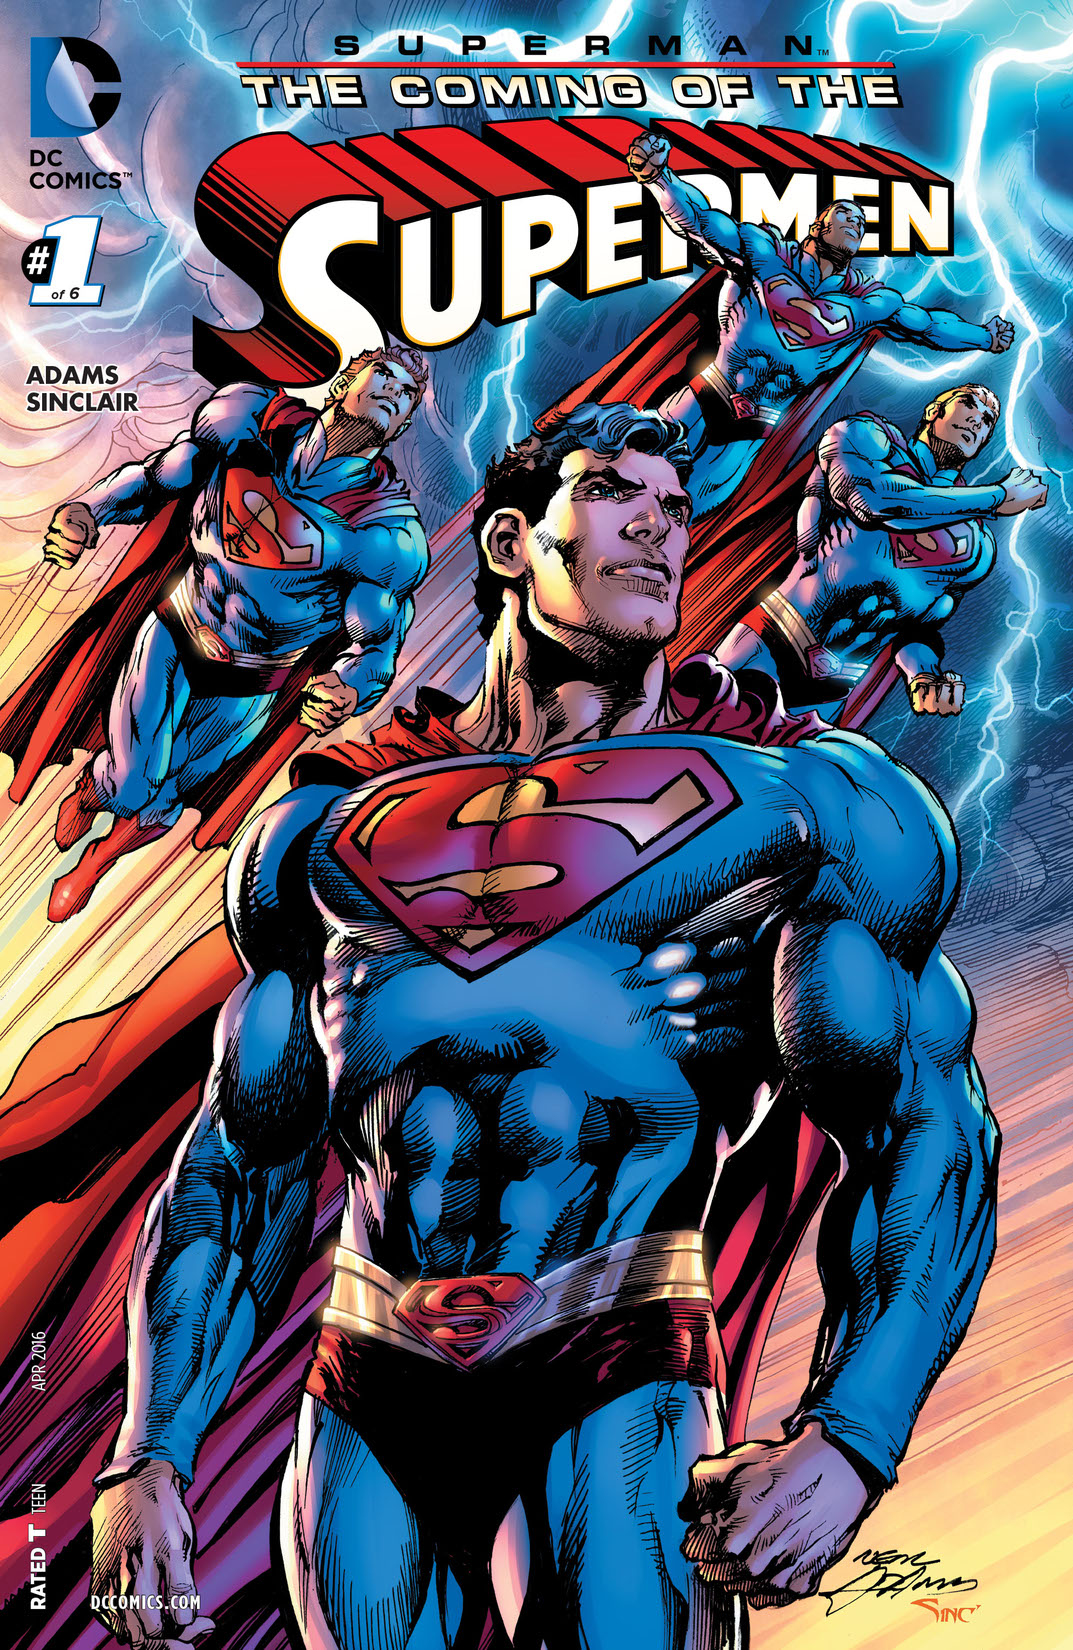 Superman: The Coming of the Supermen #1 preview images